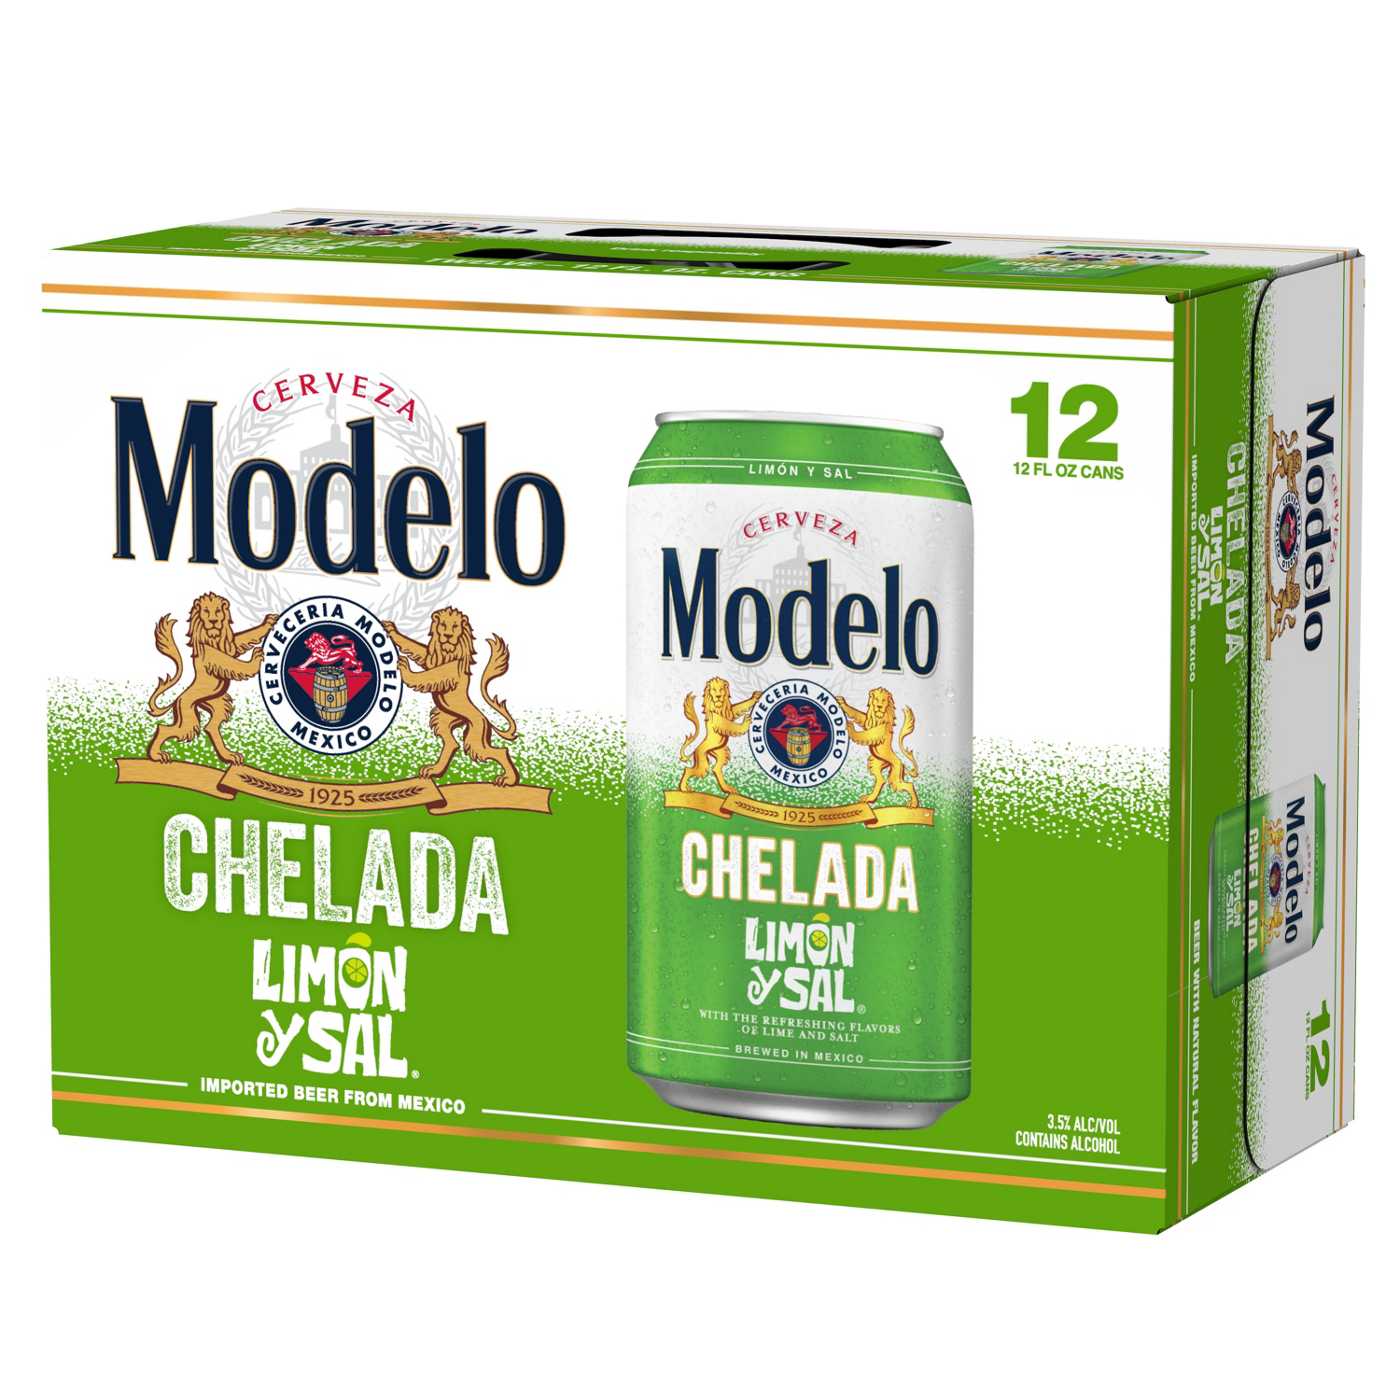 Modelo Chelada Limon y Sal Mexican Import Flavored Beer 12 oz Cans, 12 pk; image 8 of 9